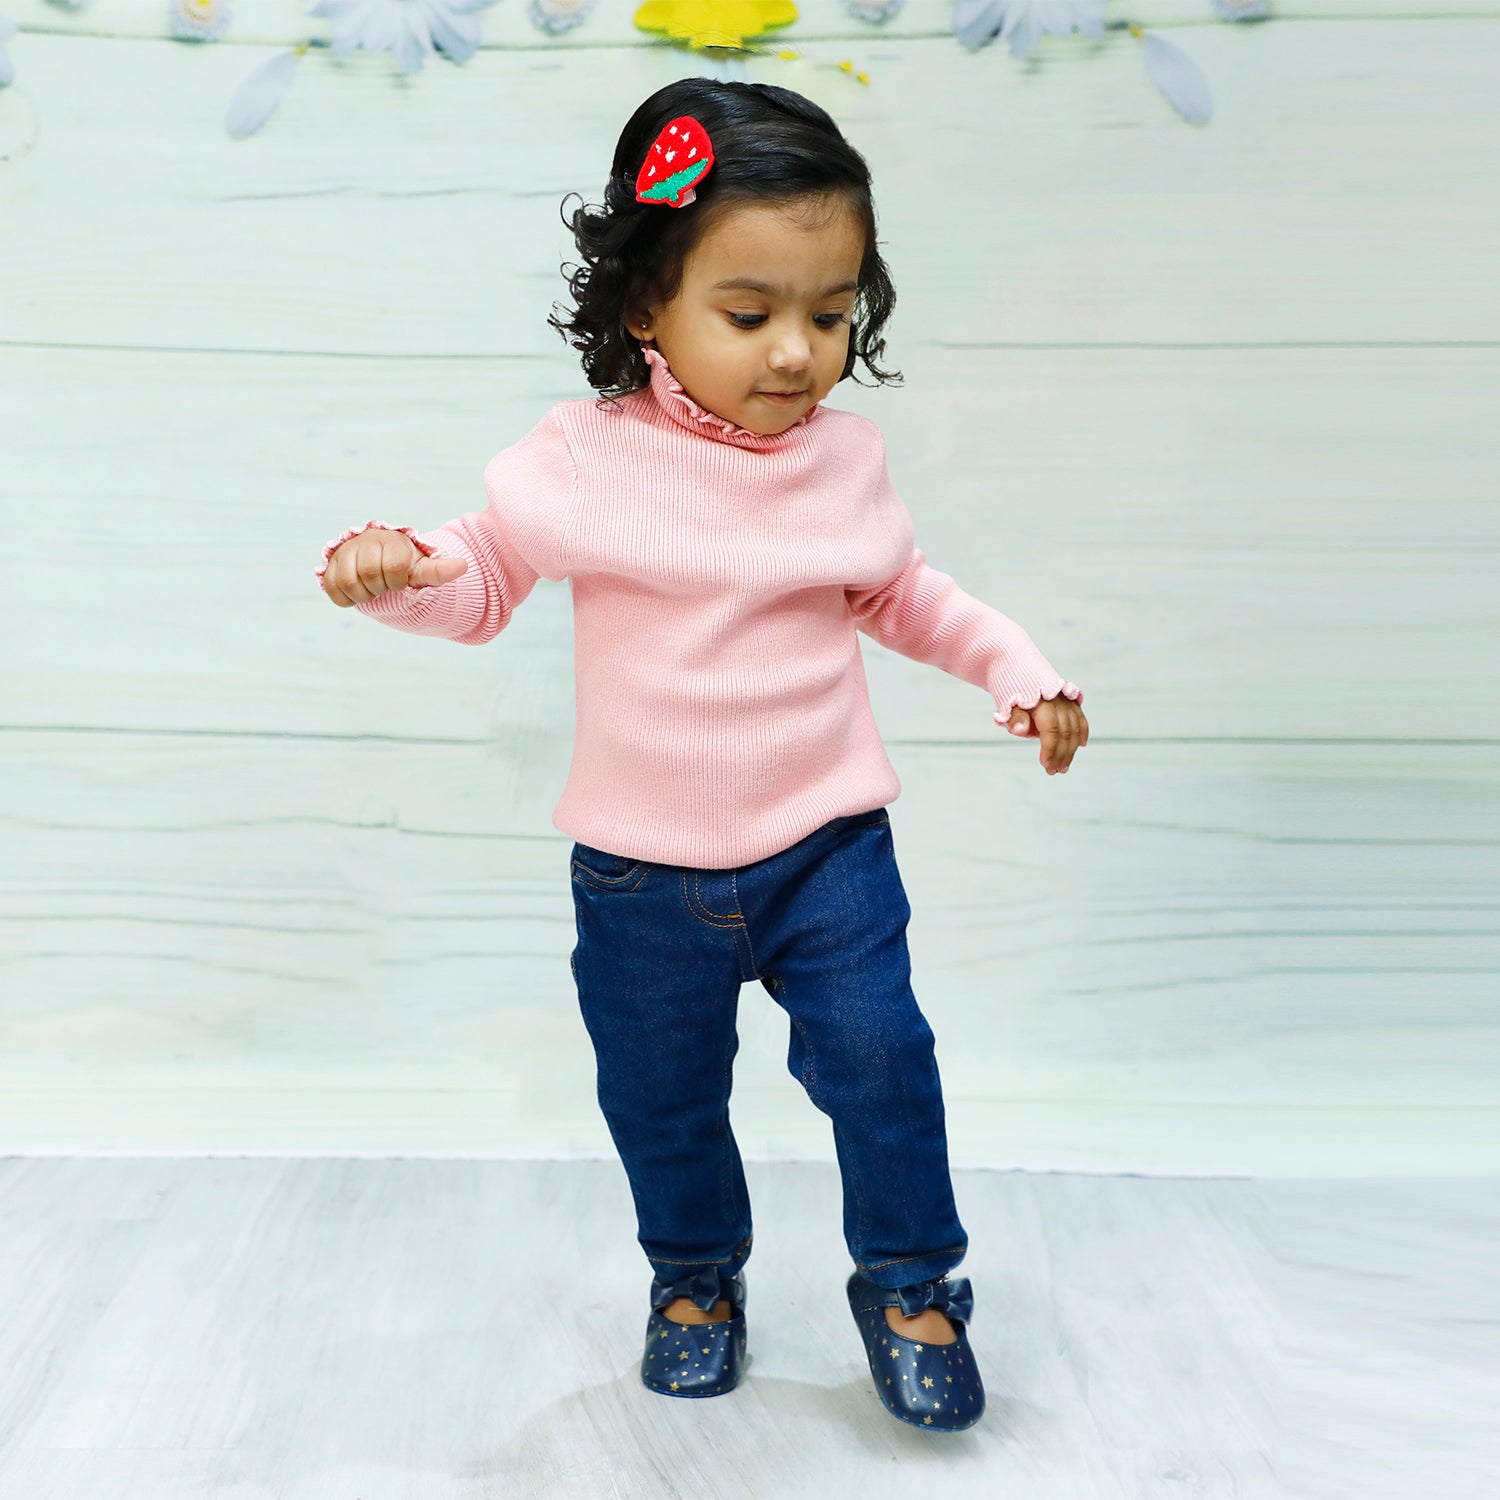 Basic Ribbed Premium Full Sleeves Knitted Kids Sweater - Pink